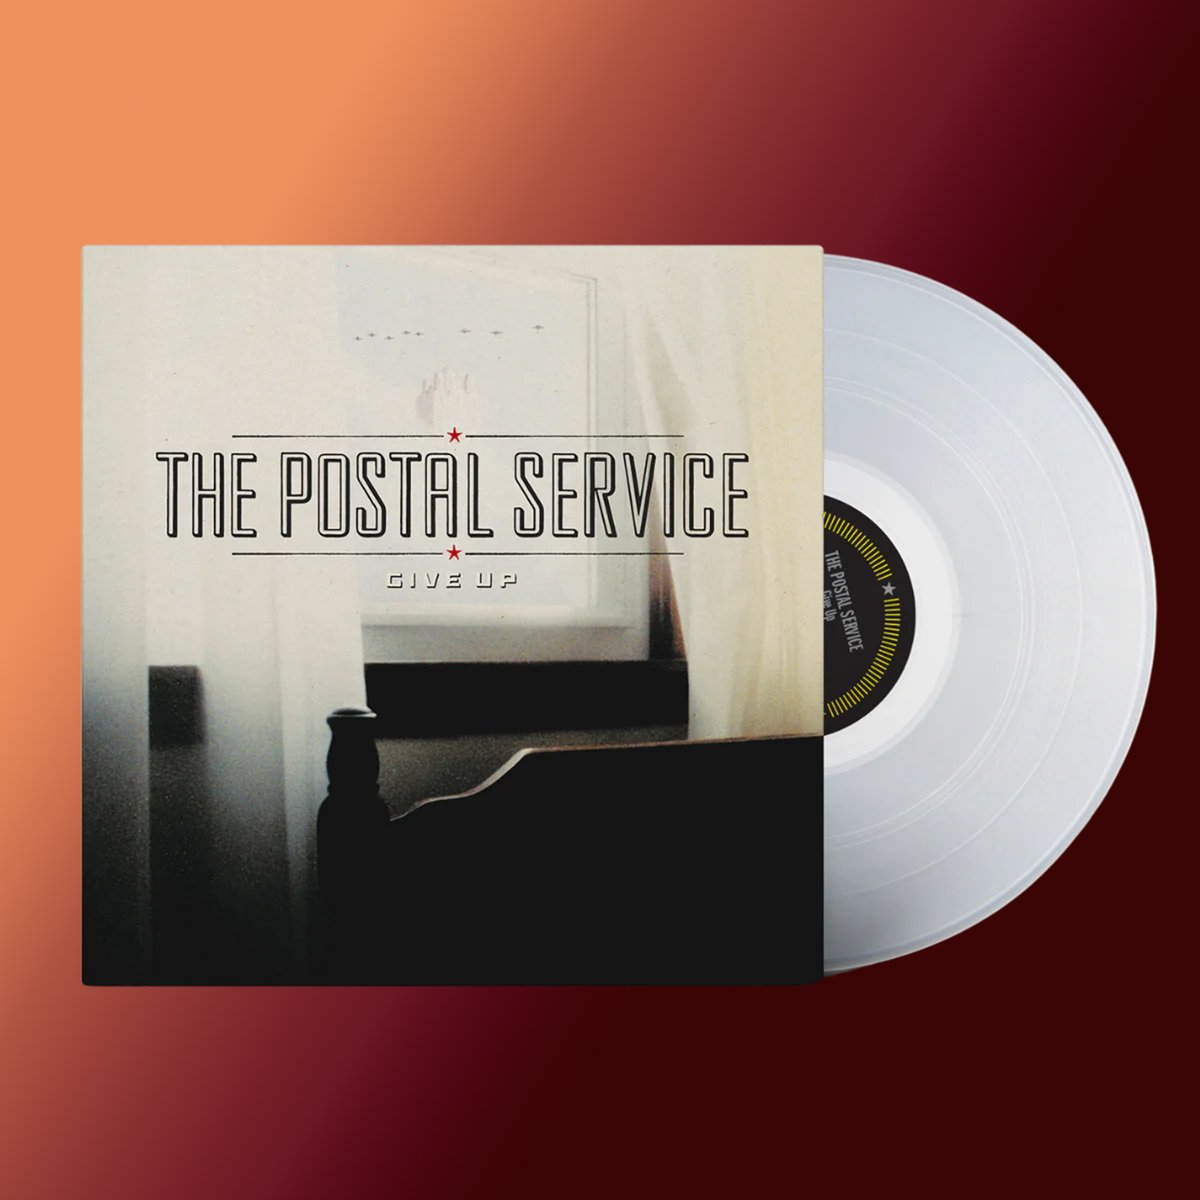 In case you missed it, 'Give Up' is available on Crystal Clear vinyl. Pick it up at an upcoming North American show this spring or in our webstore at found.ee/PSMerchStore